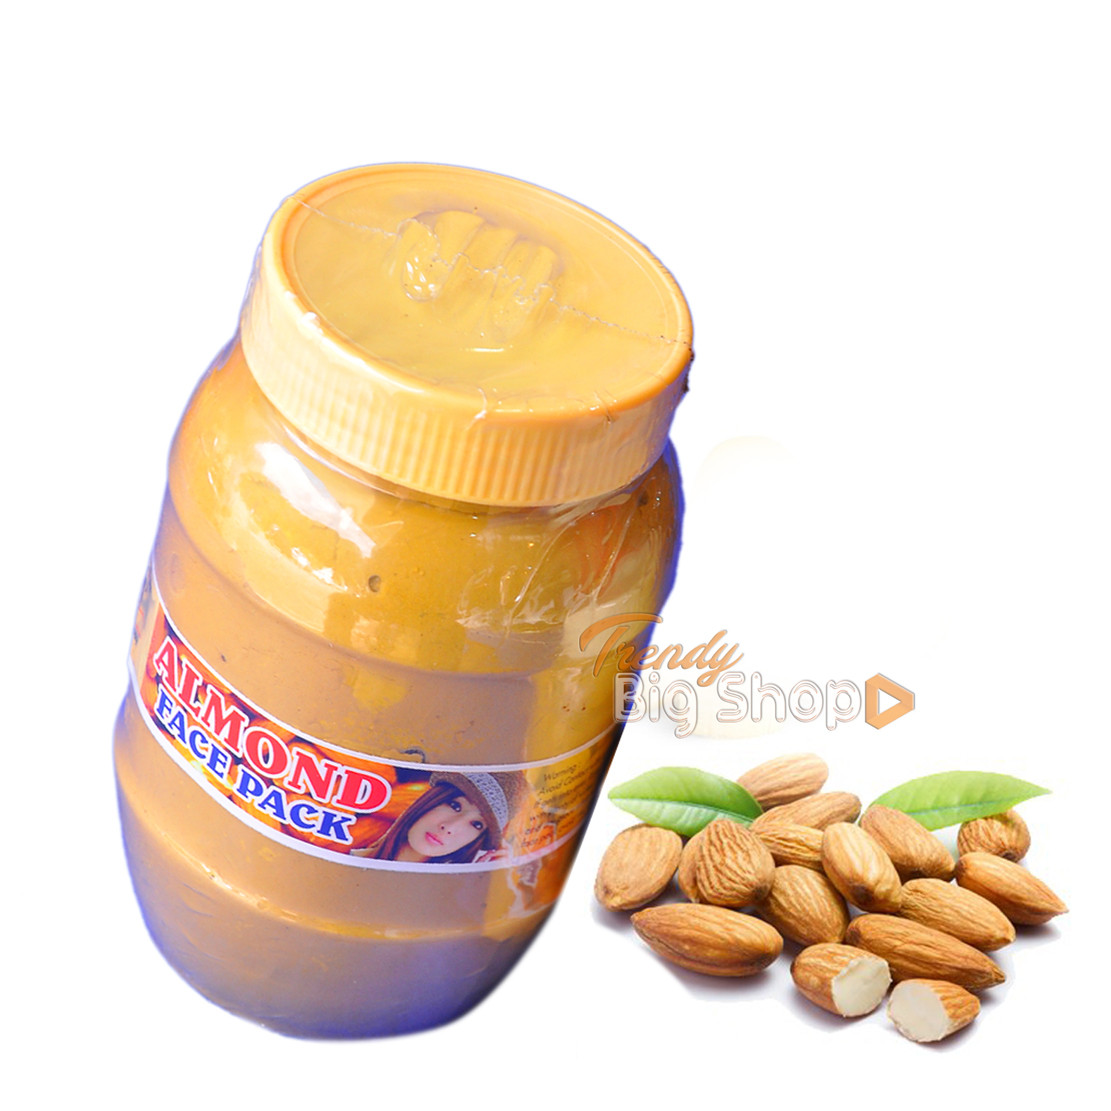 Almond Face Pack, Skin Care Almond Product, 500gm